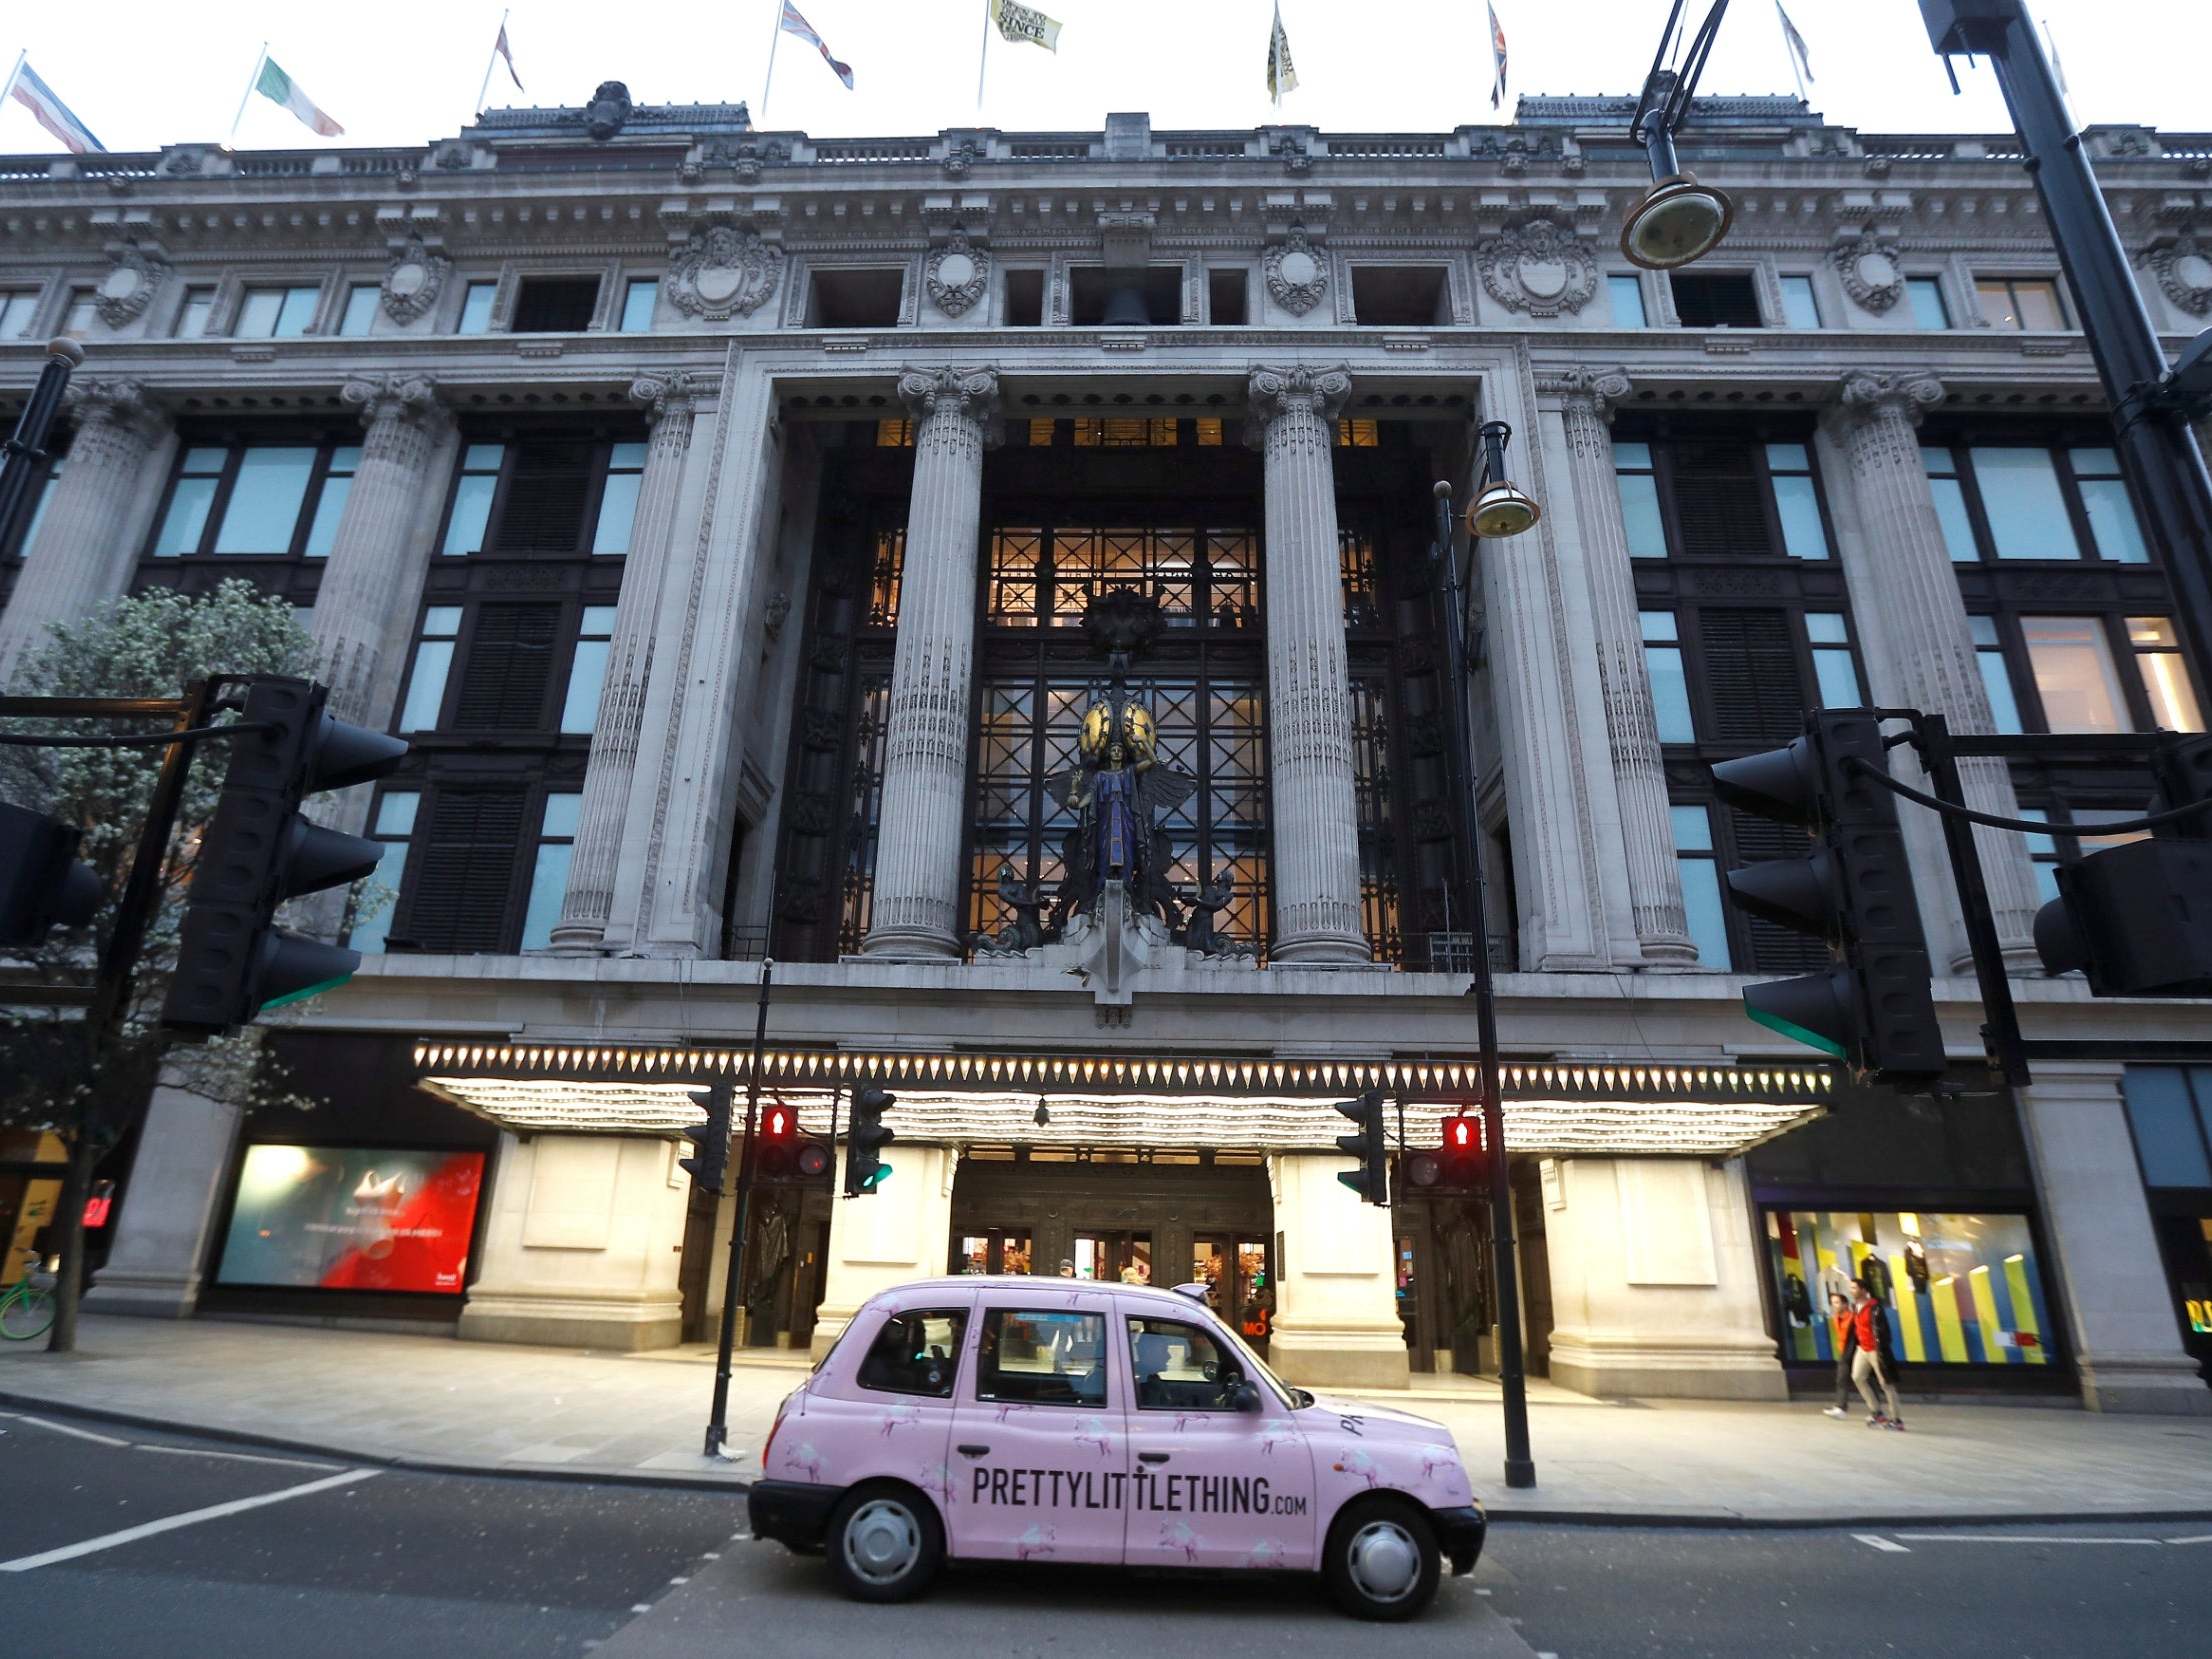 Selfridges to cut 450 jobs as sales tumble due to pandemic | The